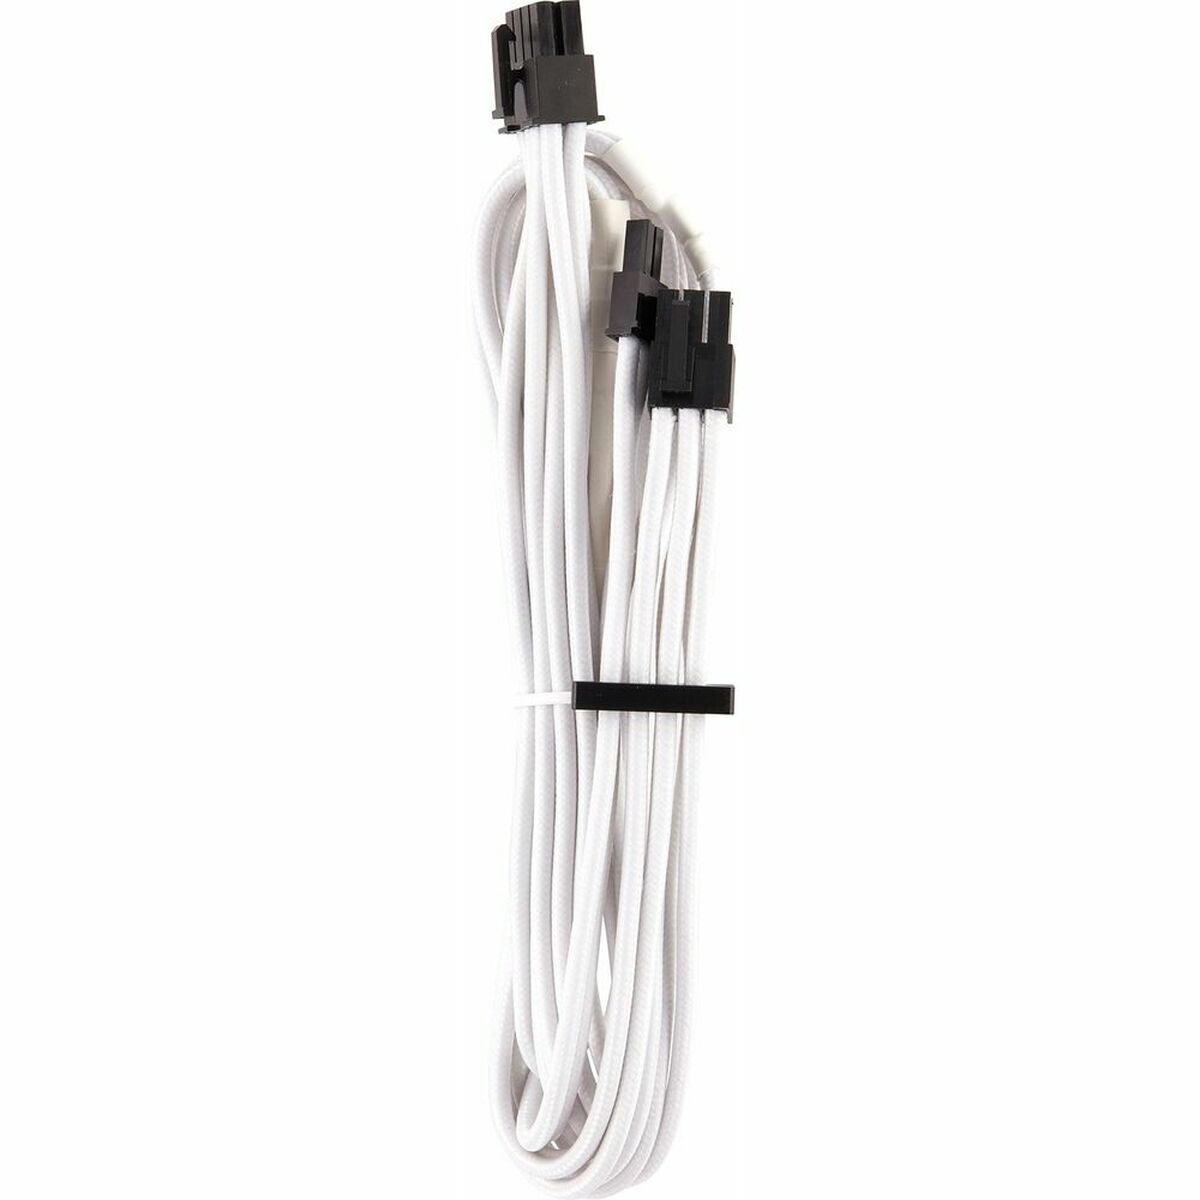 Cable CP-8920245 (Refurbished A+)